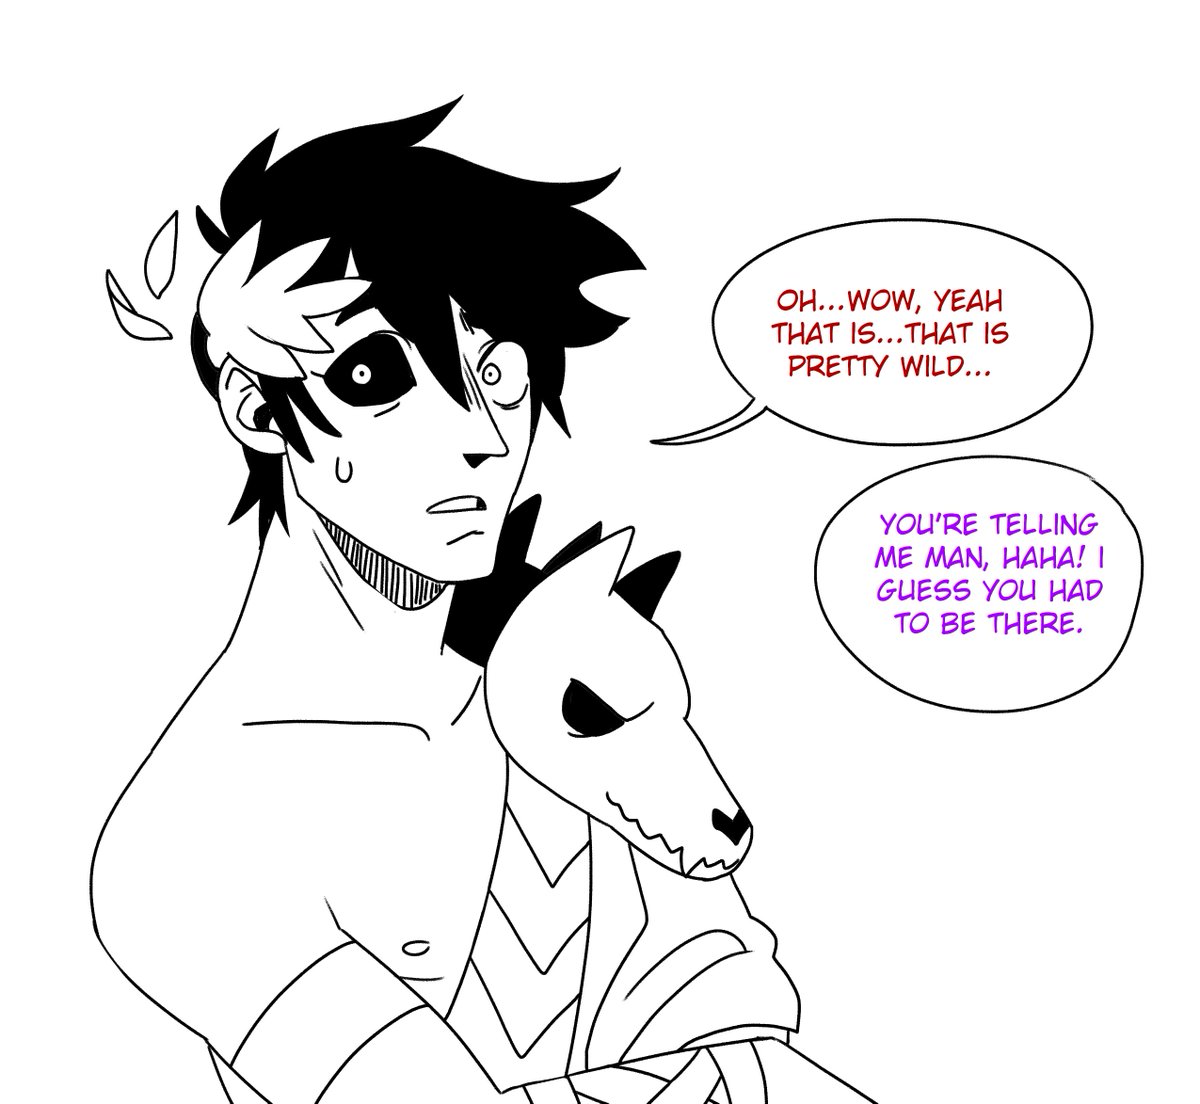 dionysus tells zagreus about the last time he visited his mom's family 